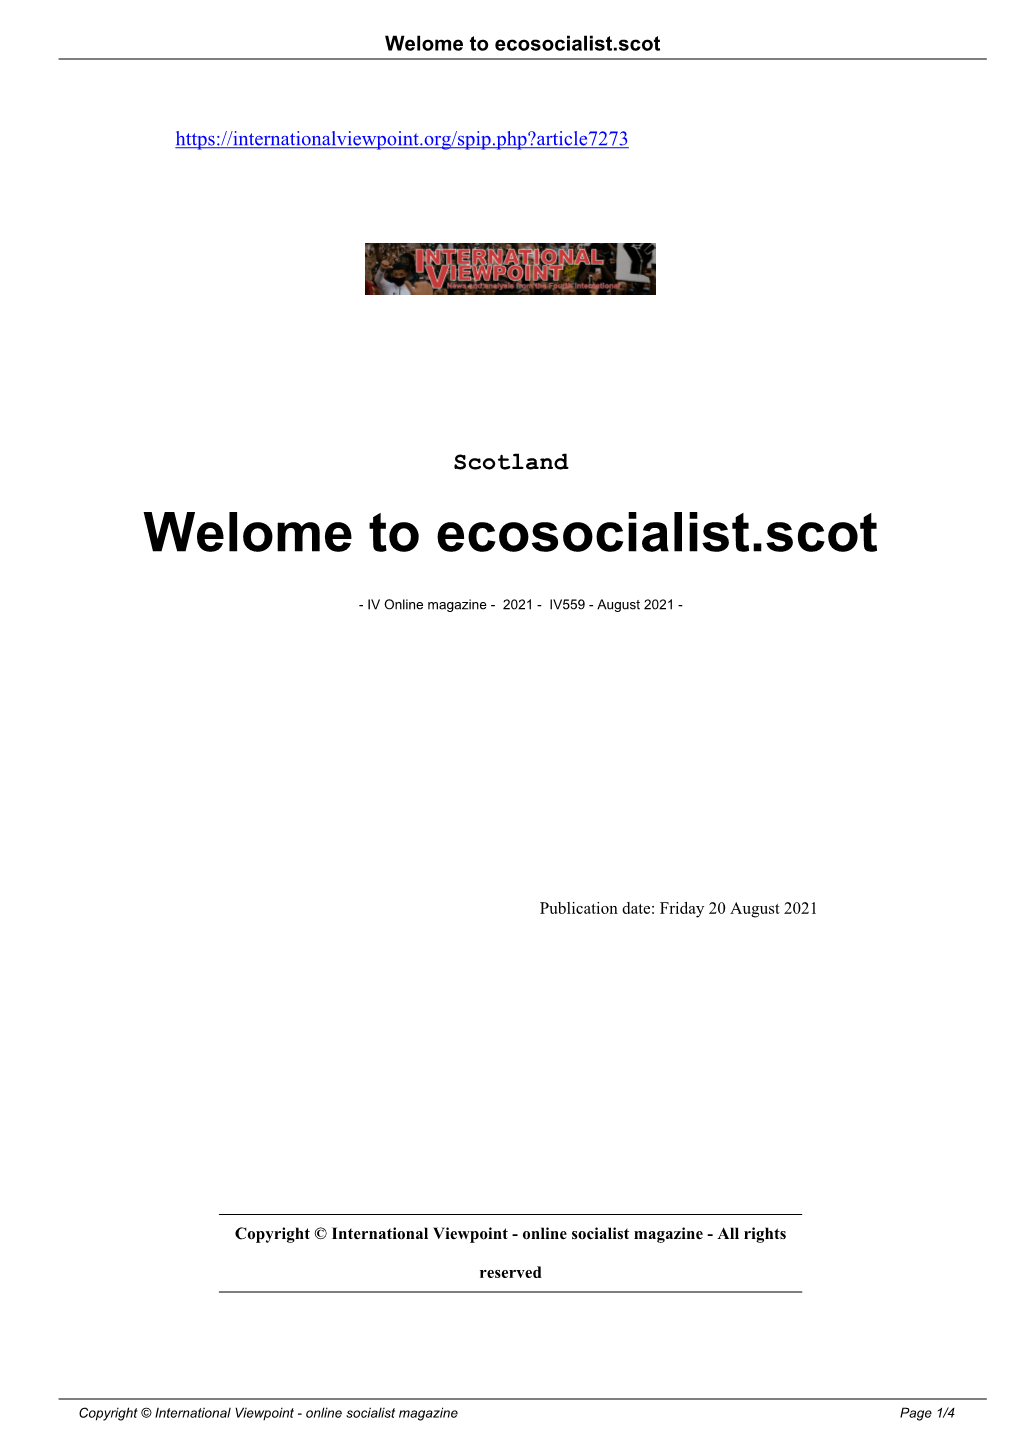 Welome to Ecosocialist.Scot